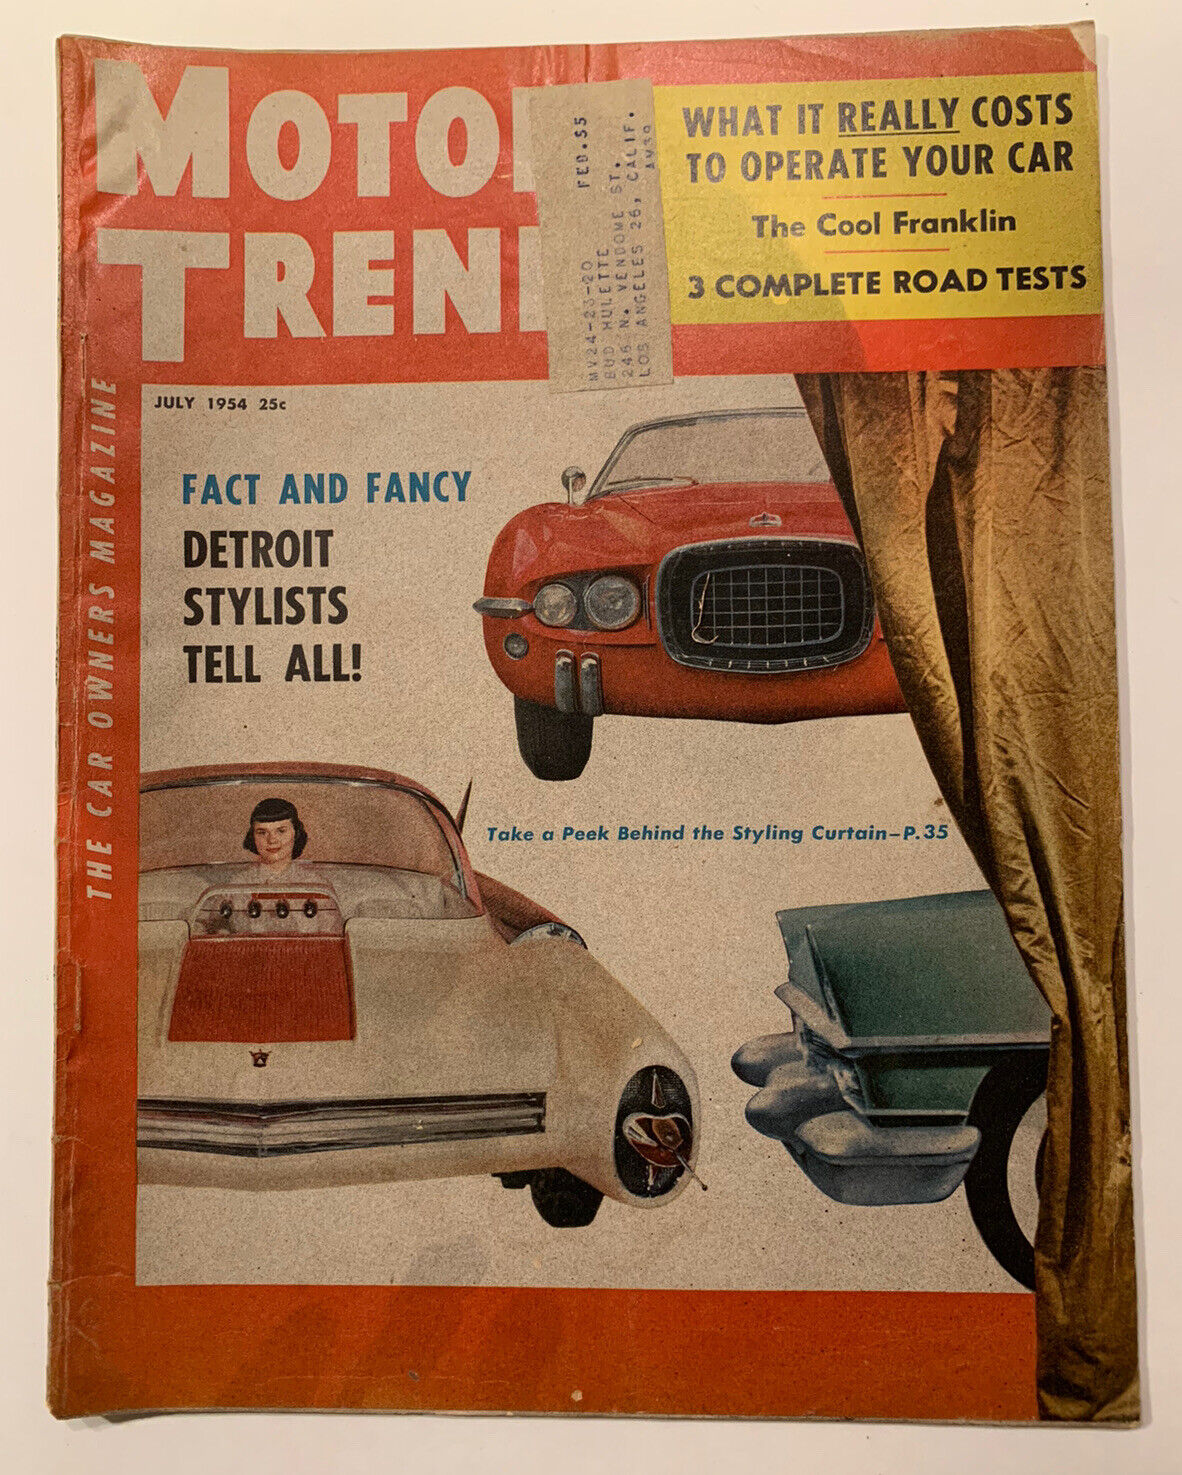 MOTOR TREND magazine: July 1954 - Detroit Stylists Tell All, Car Operating Costs